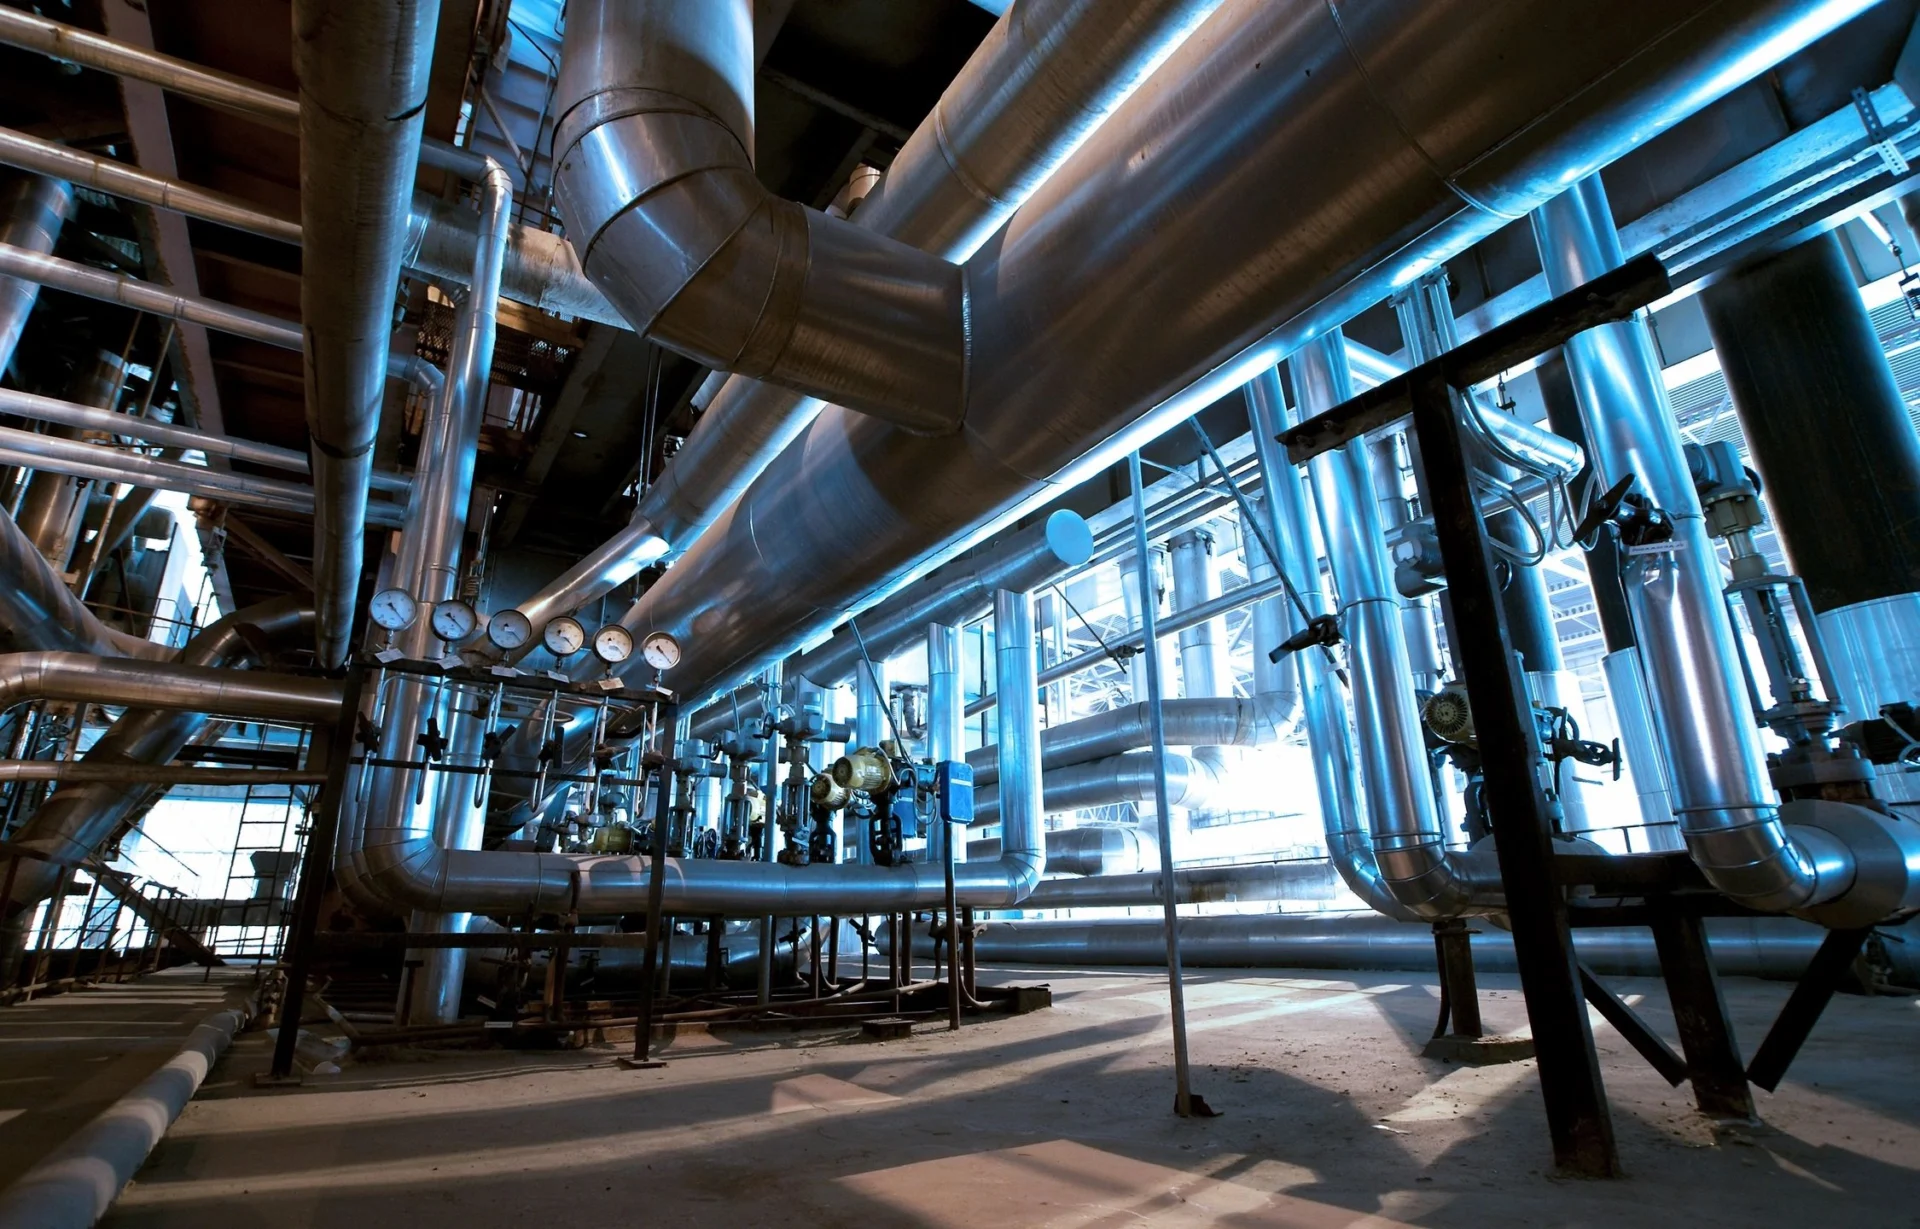 A large industrial building with pipes and valves.